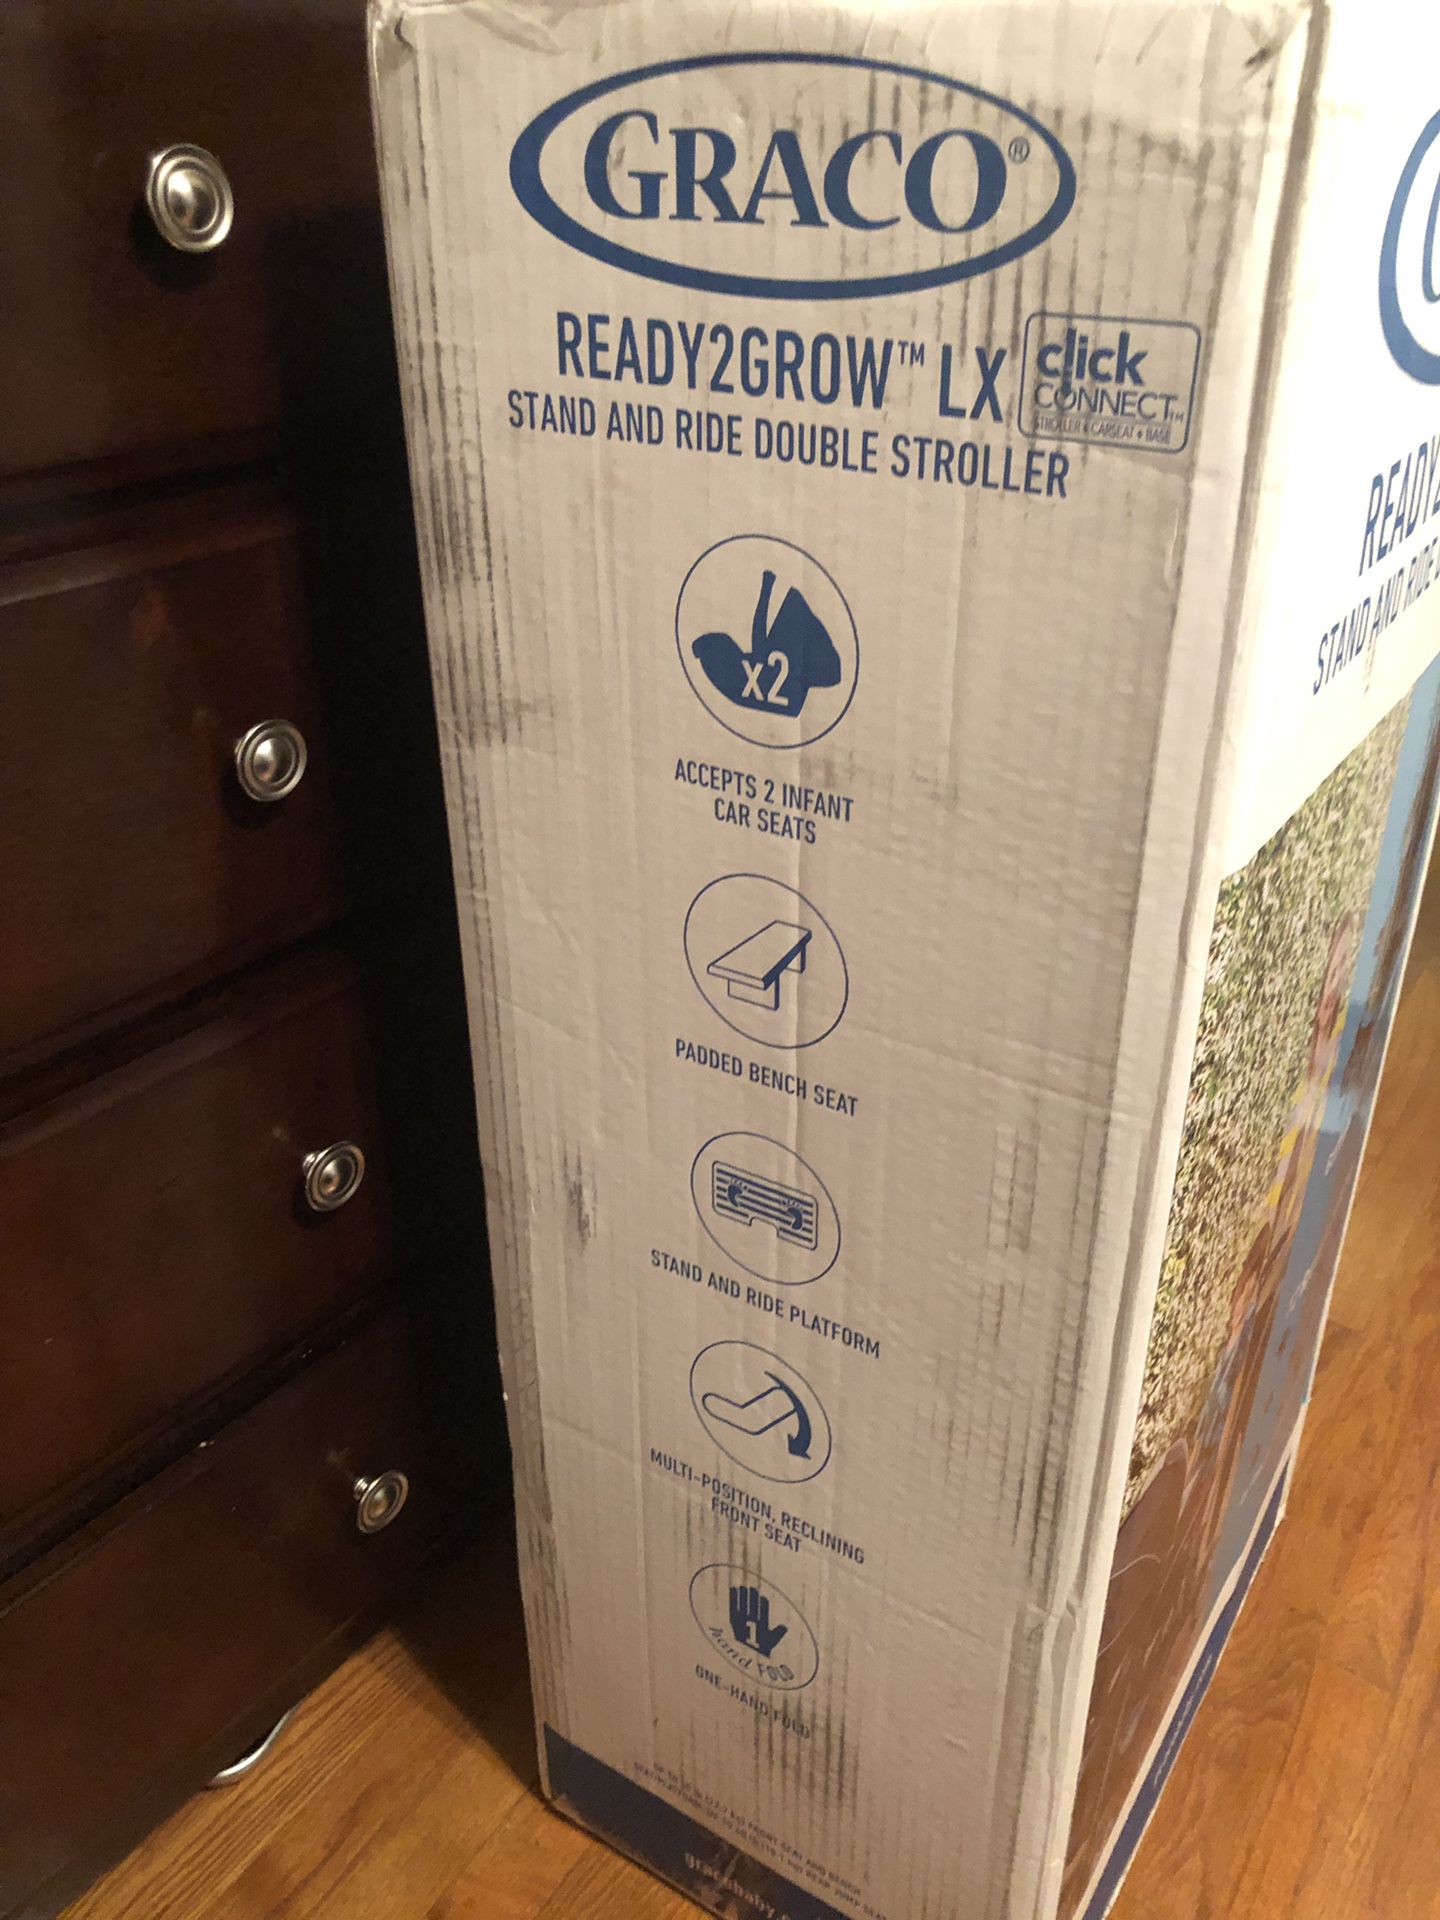 Graco double stroller. Brand New unopened box